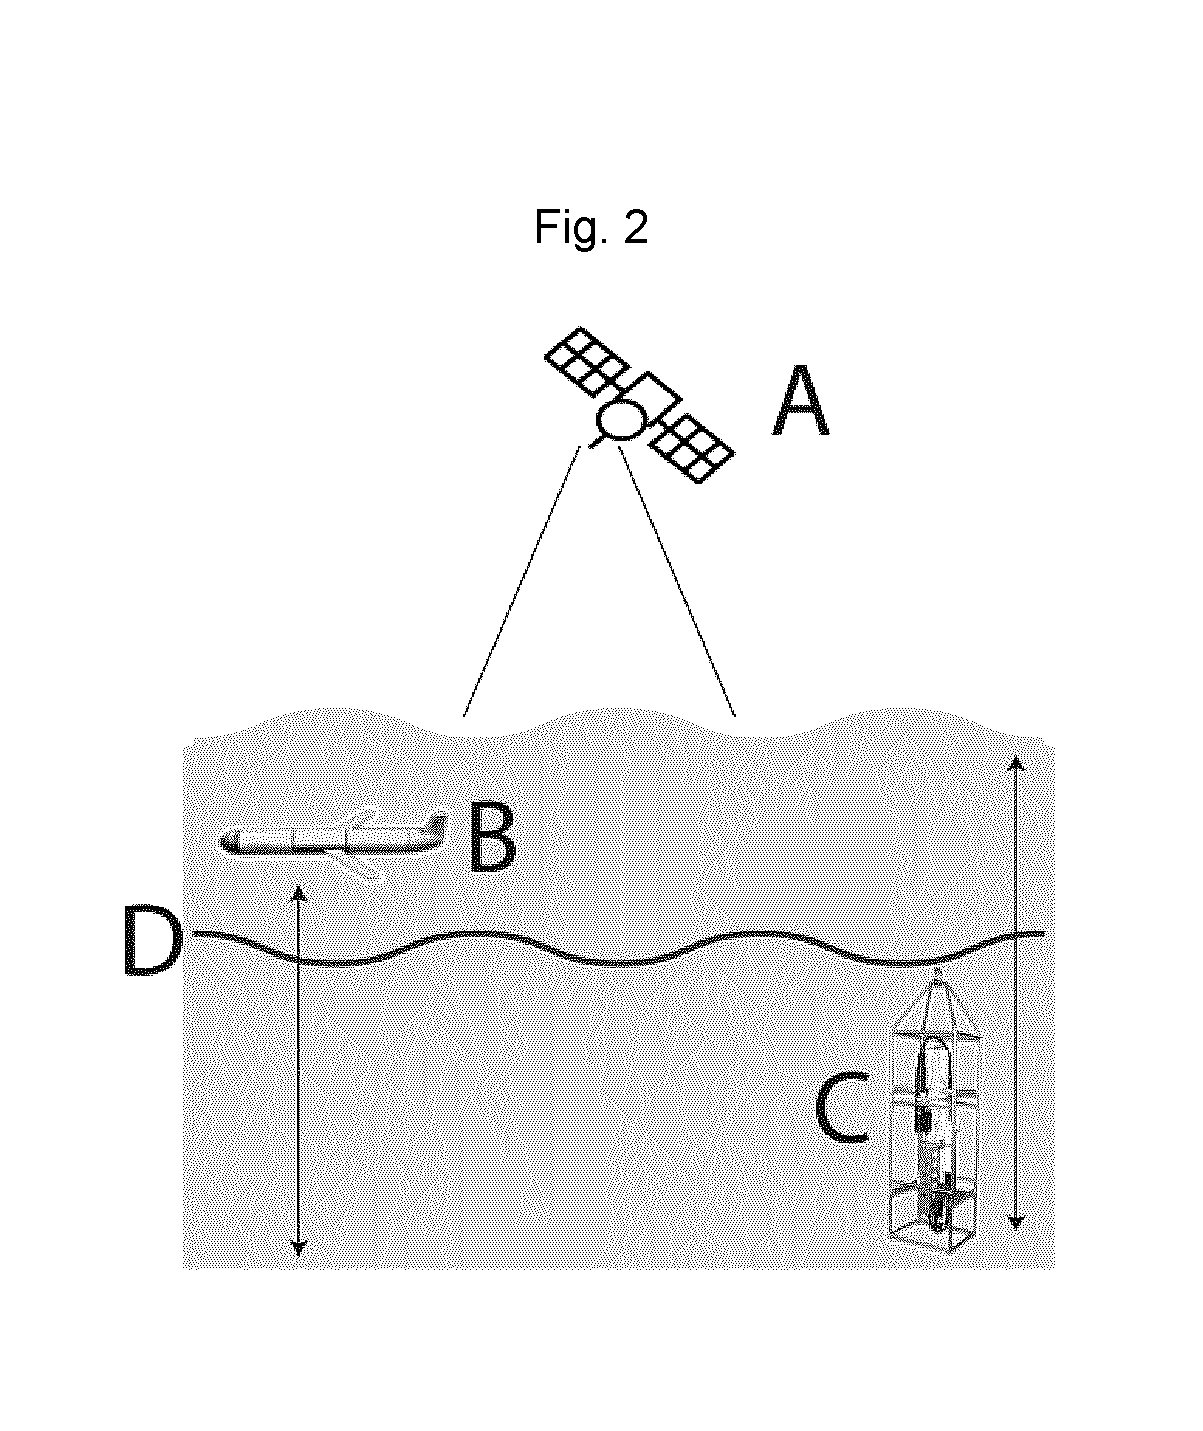 Process and method for the enhancement of sequestering atmospheric carbon through ocean iron fertilization, and method for calculating net carbon capture from said process and method